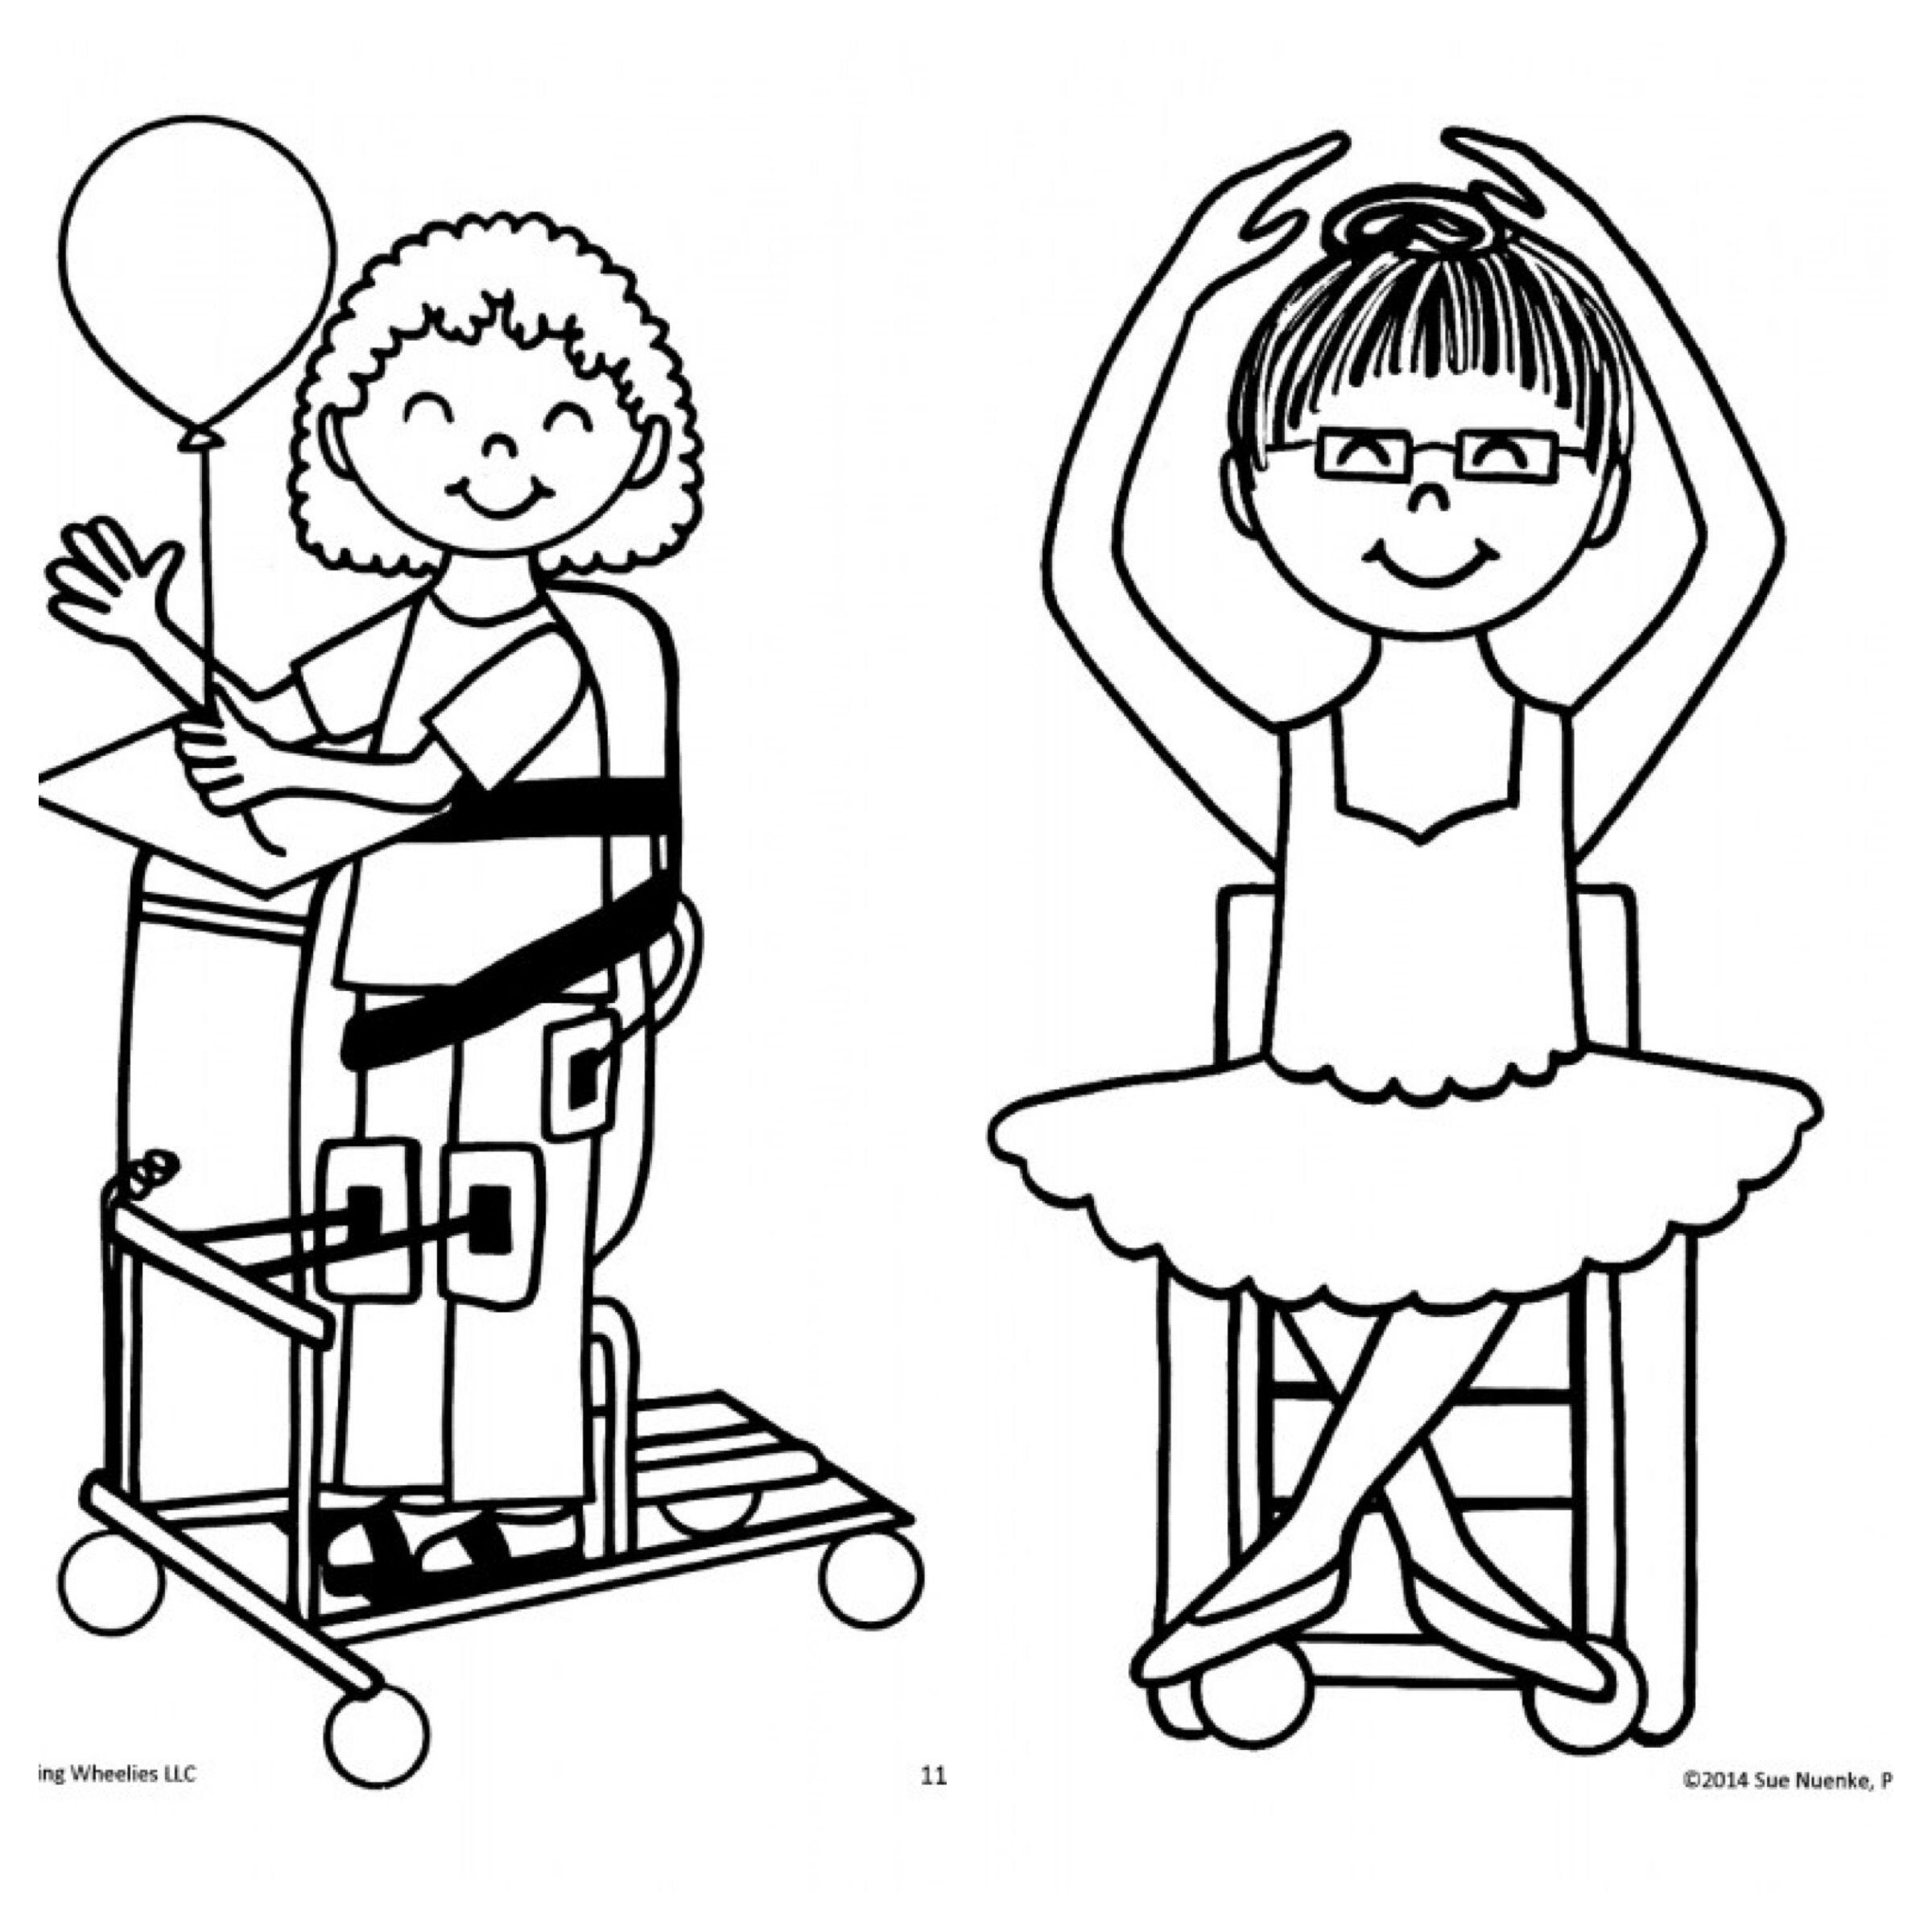 Kids With Disabilities Coloring Pages - Coloring Home